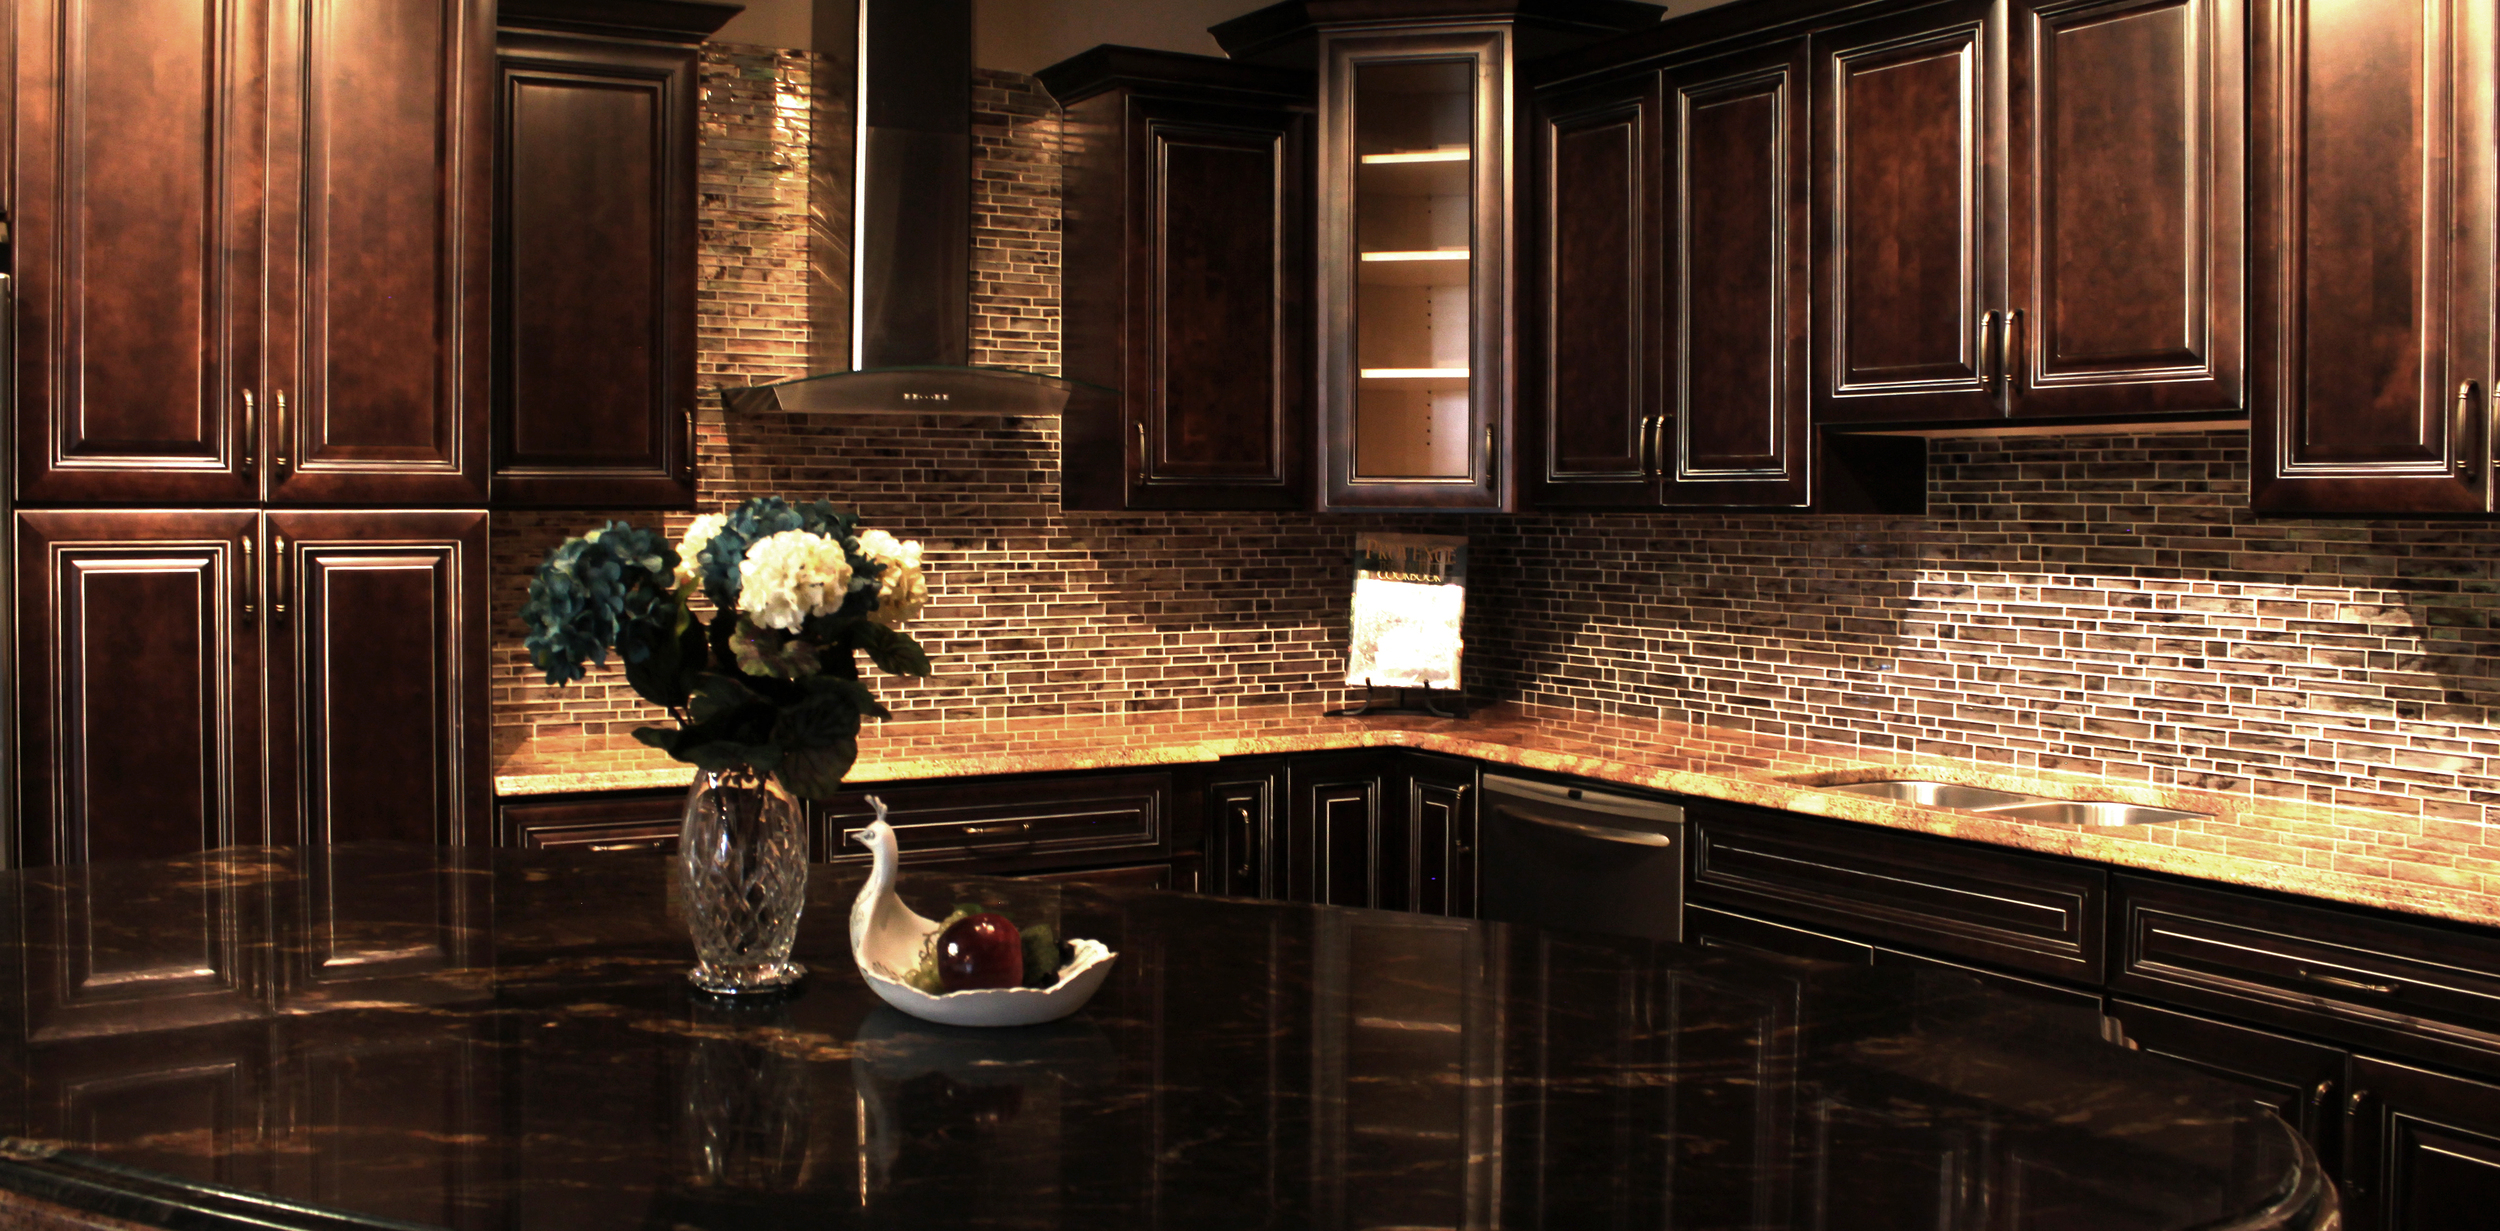 Franklin Park Kitchen Cabinets Sinks And Countertops Rock Counter